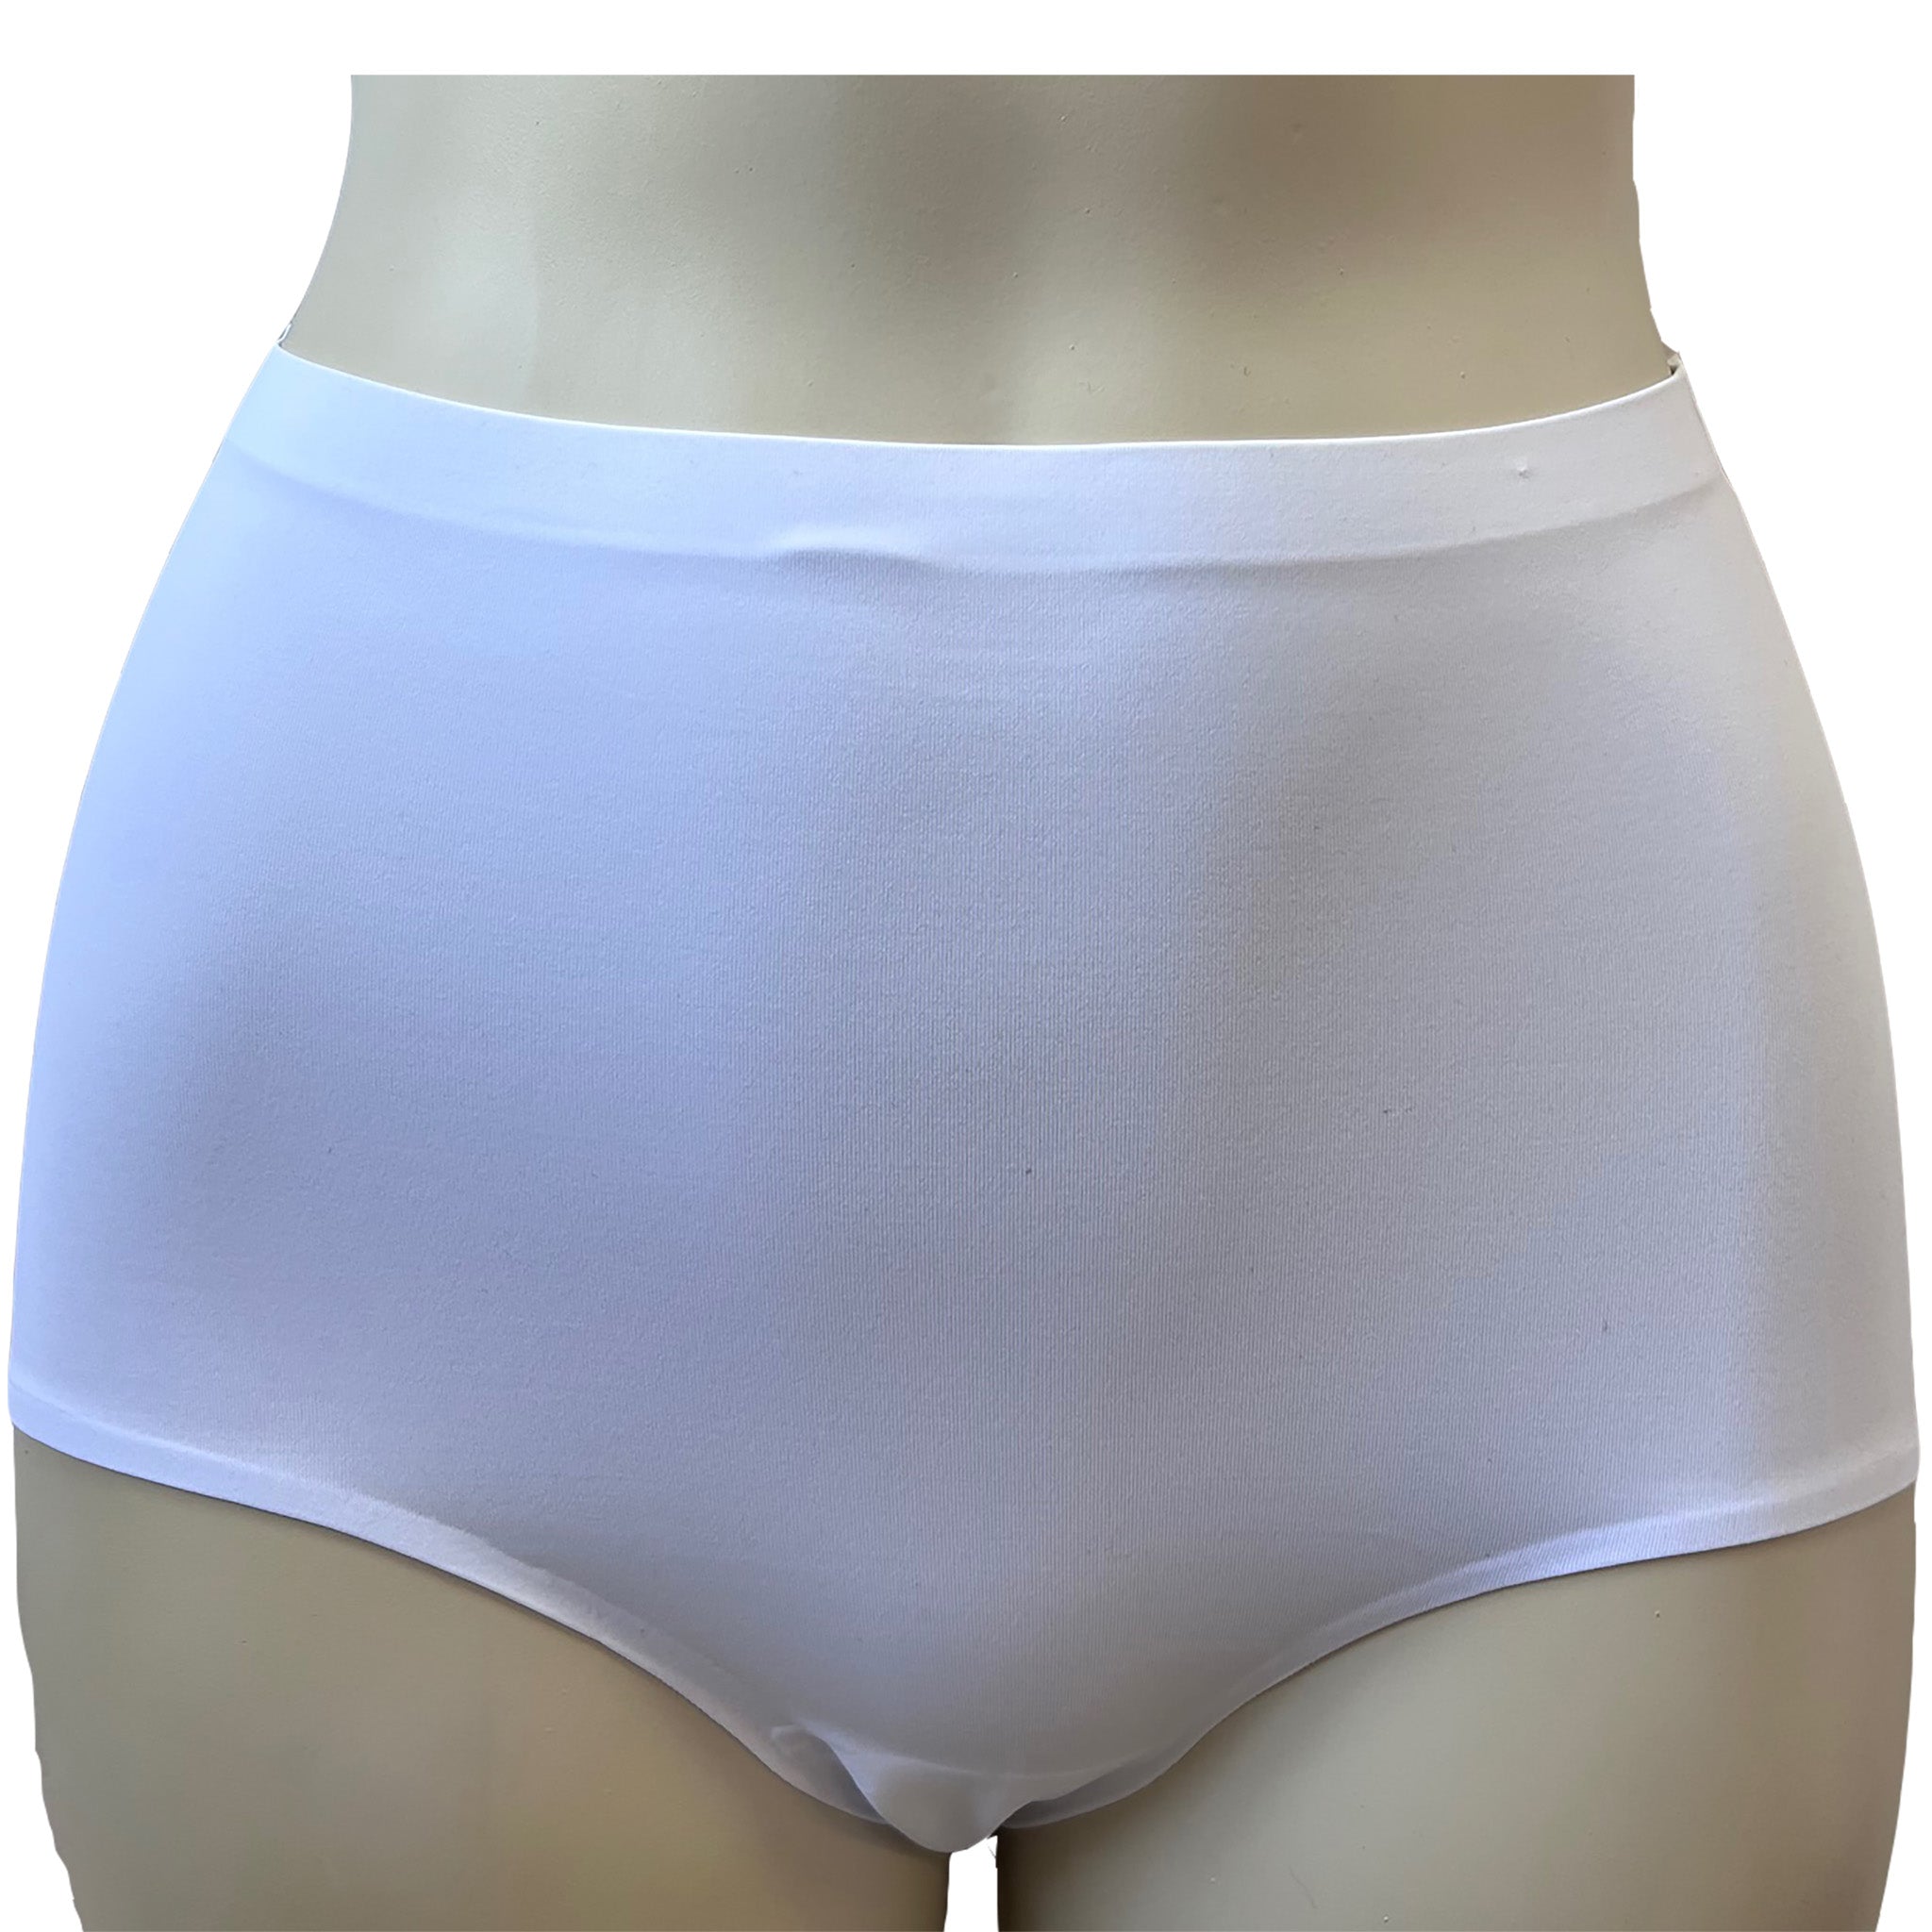 https://justforyouboutique.co.uk/cdn/shop/files/ladies-white-seamless-seamfree-no-vpl-knickers-briefs-in-uk-size-18-20-just-for-you-boutique..jpg?v=1699818696